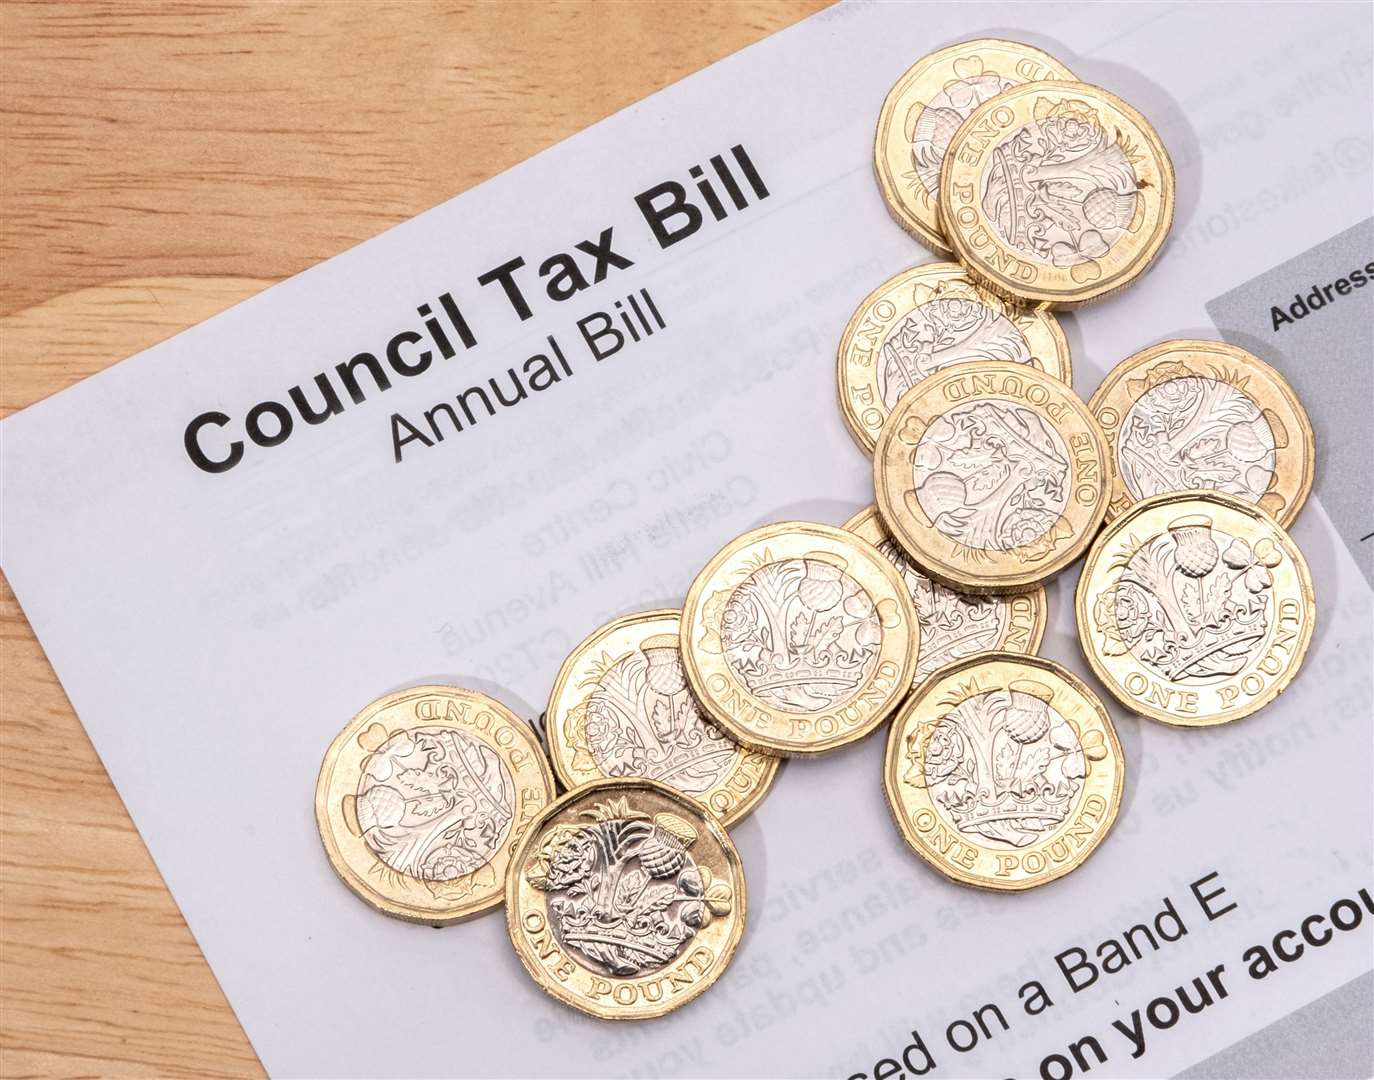 maidstone-to-raise-council-tax-next-year-by-maximum-percentage-allowed